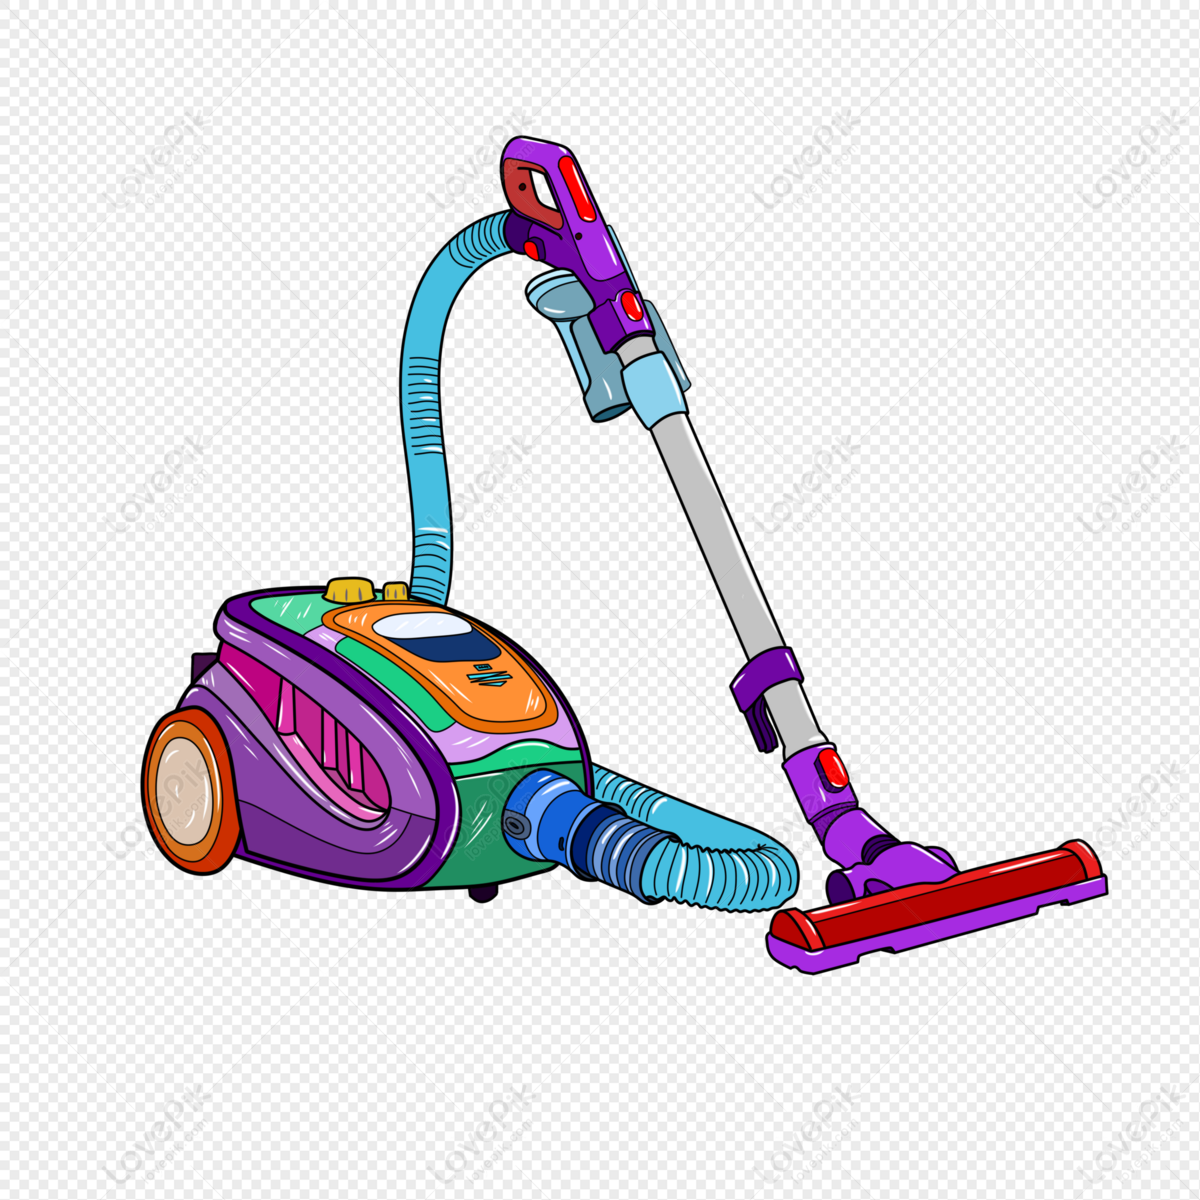 Vacuum Cleaner PNG Transparent Image And Clipart Image For Free Download -  Lovepik | 401493157